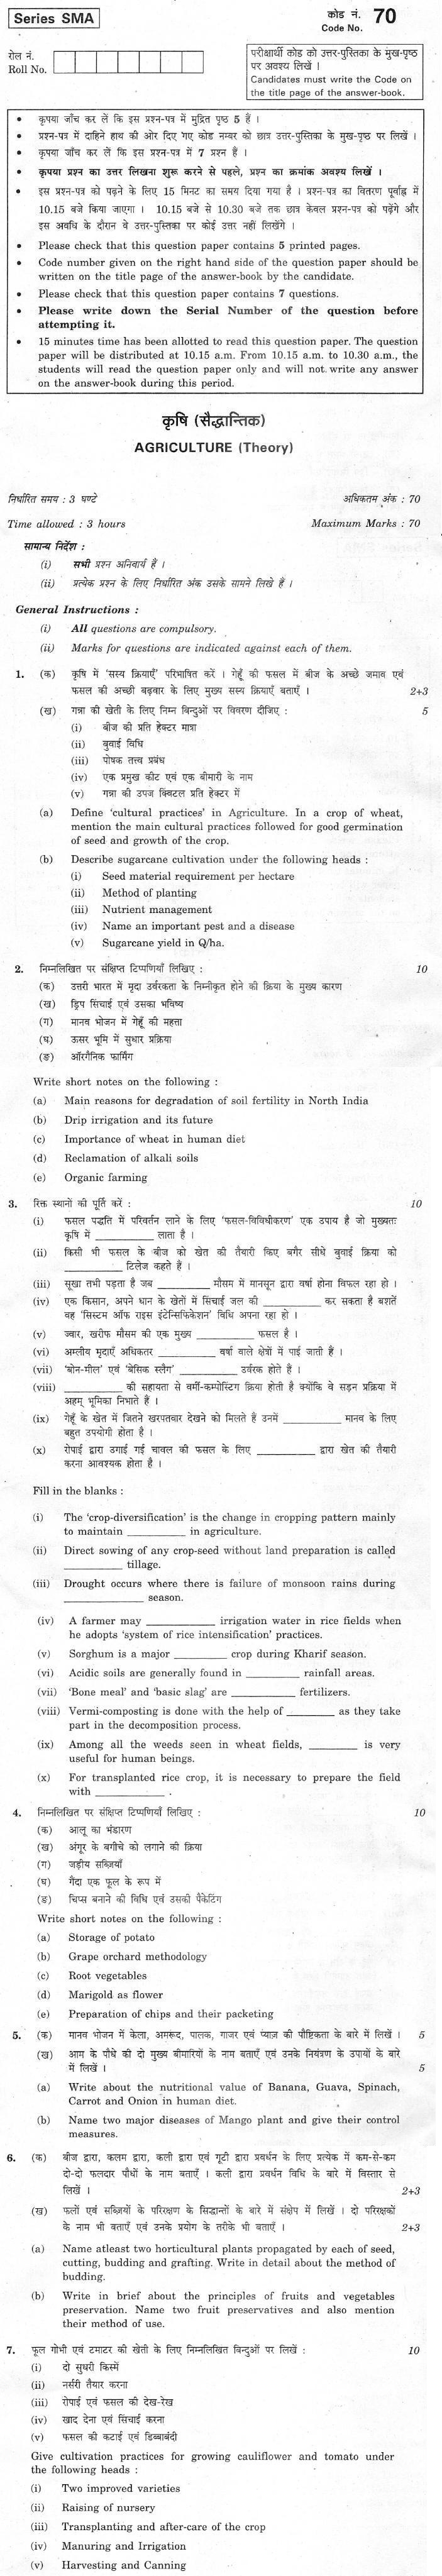 CBSE Class XII Previous Year Question Paper 2012: Agriculture